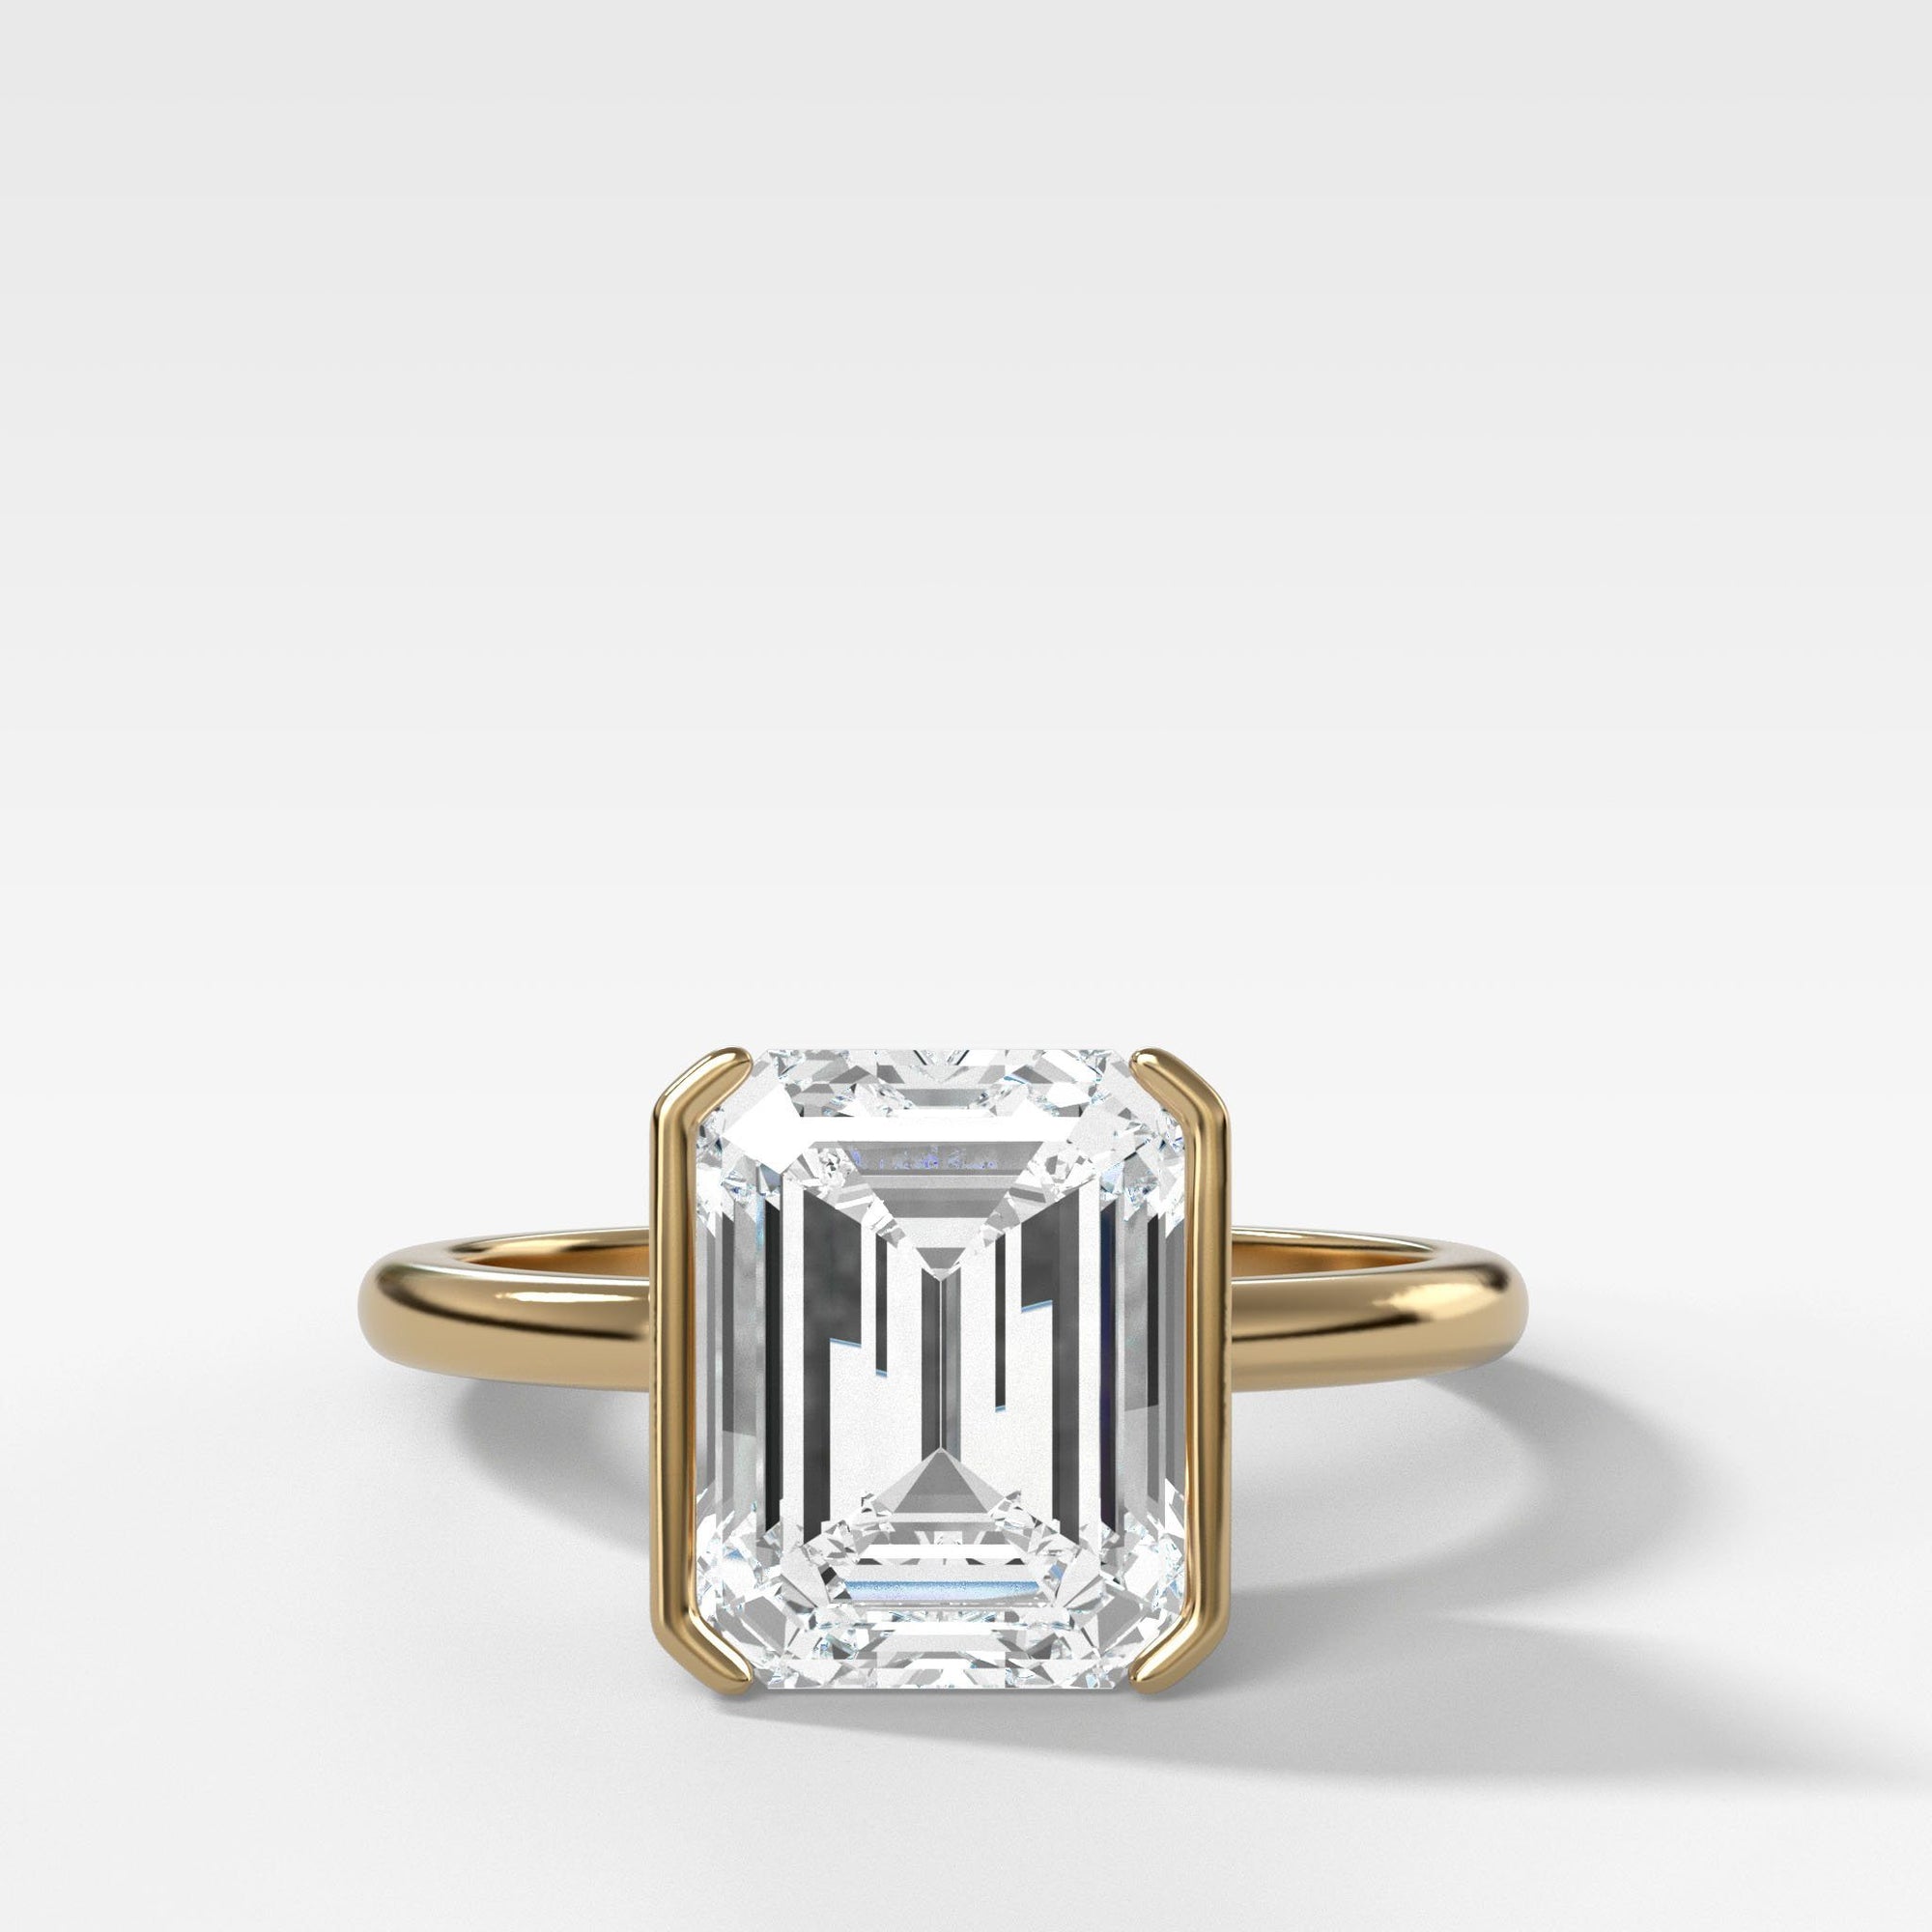 North South Half Bezel Solitaire Engagement Ring With Emerald Cut by Good Stone in Yellow Gold